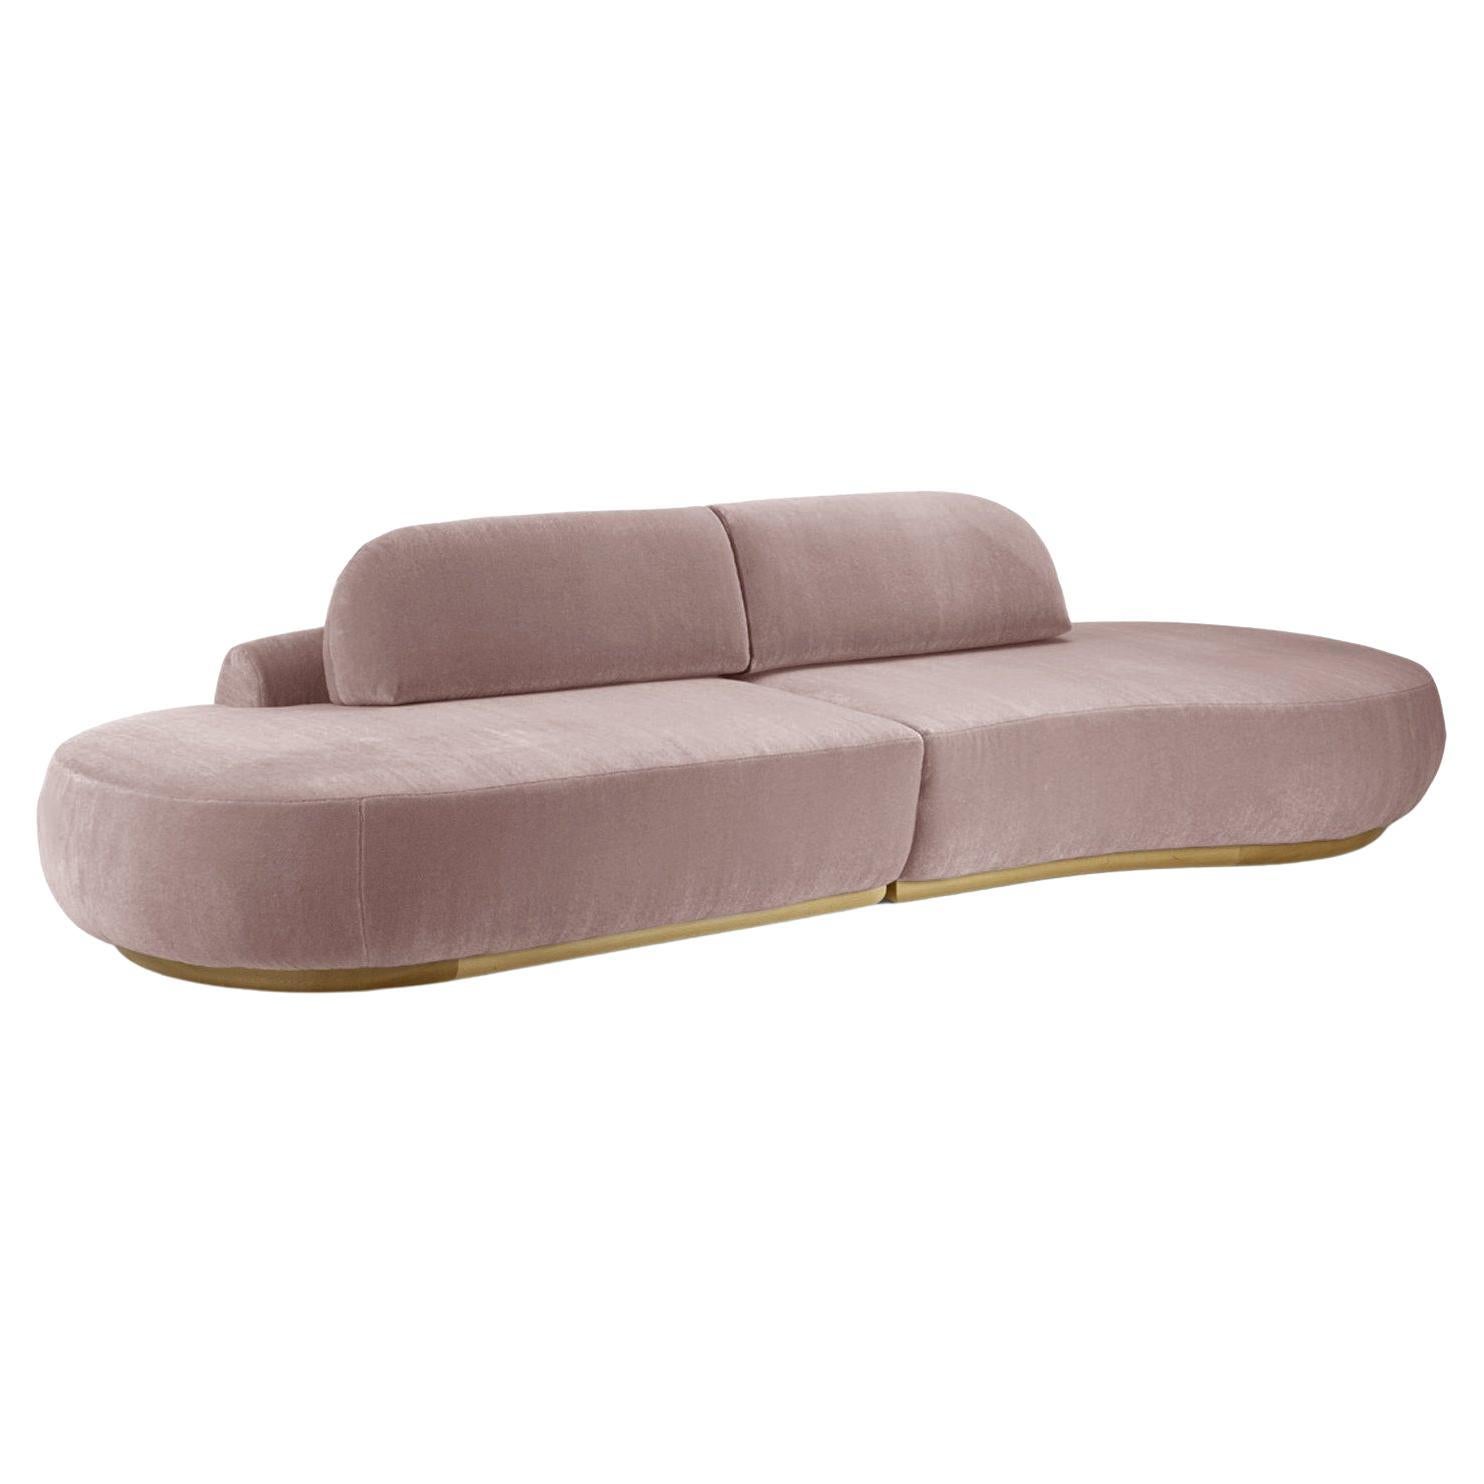 Naked Curved Sectional Sofa, 2 Piece with Natural Oak and Barcelona Lotus For Sale